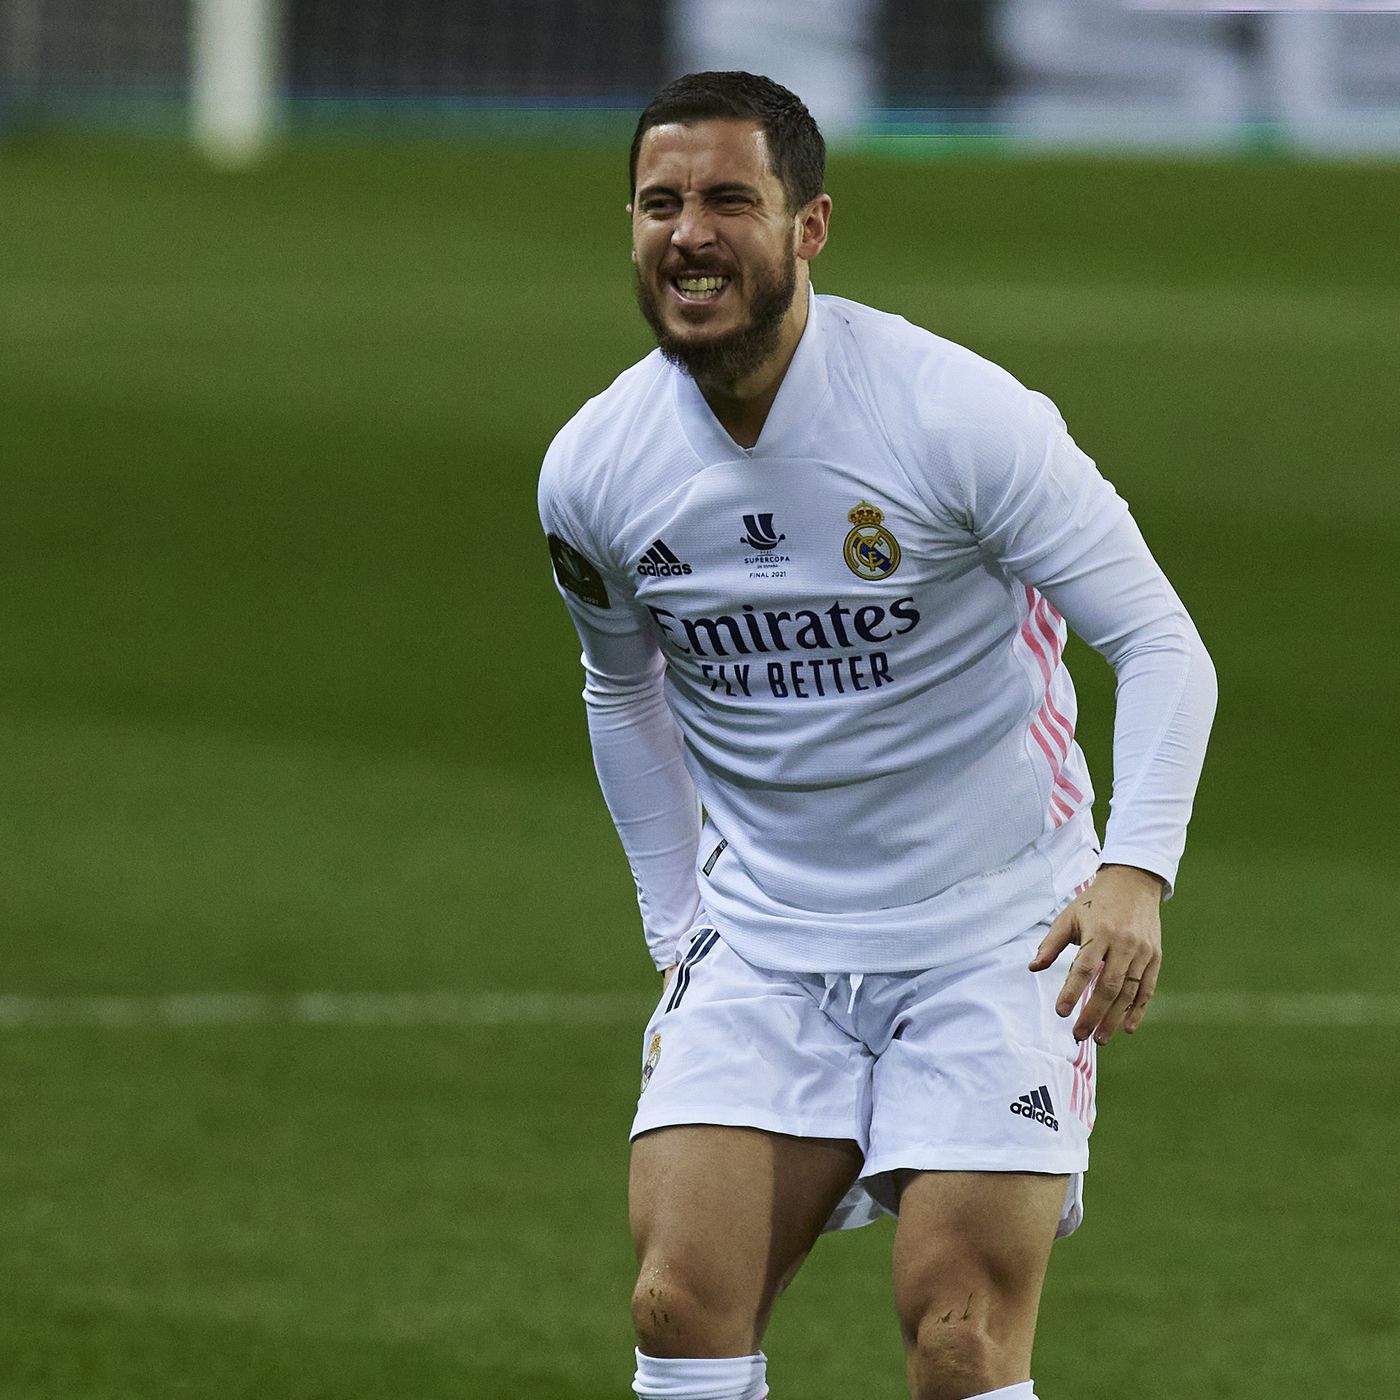 Hazard Injured at Madrid AGAIN! Is This The End?